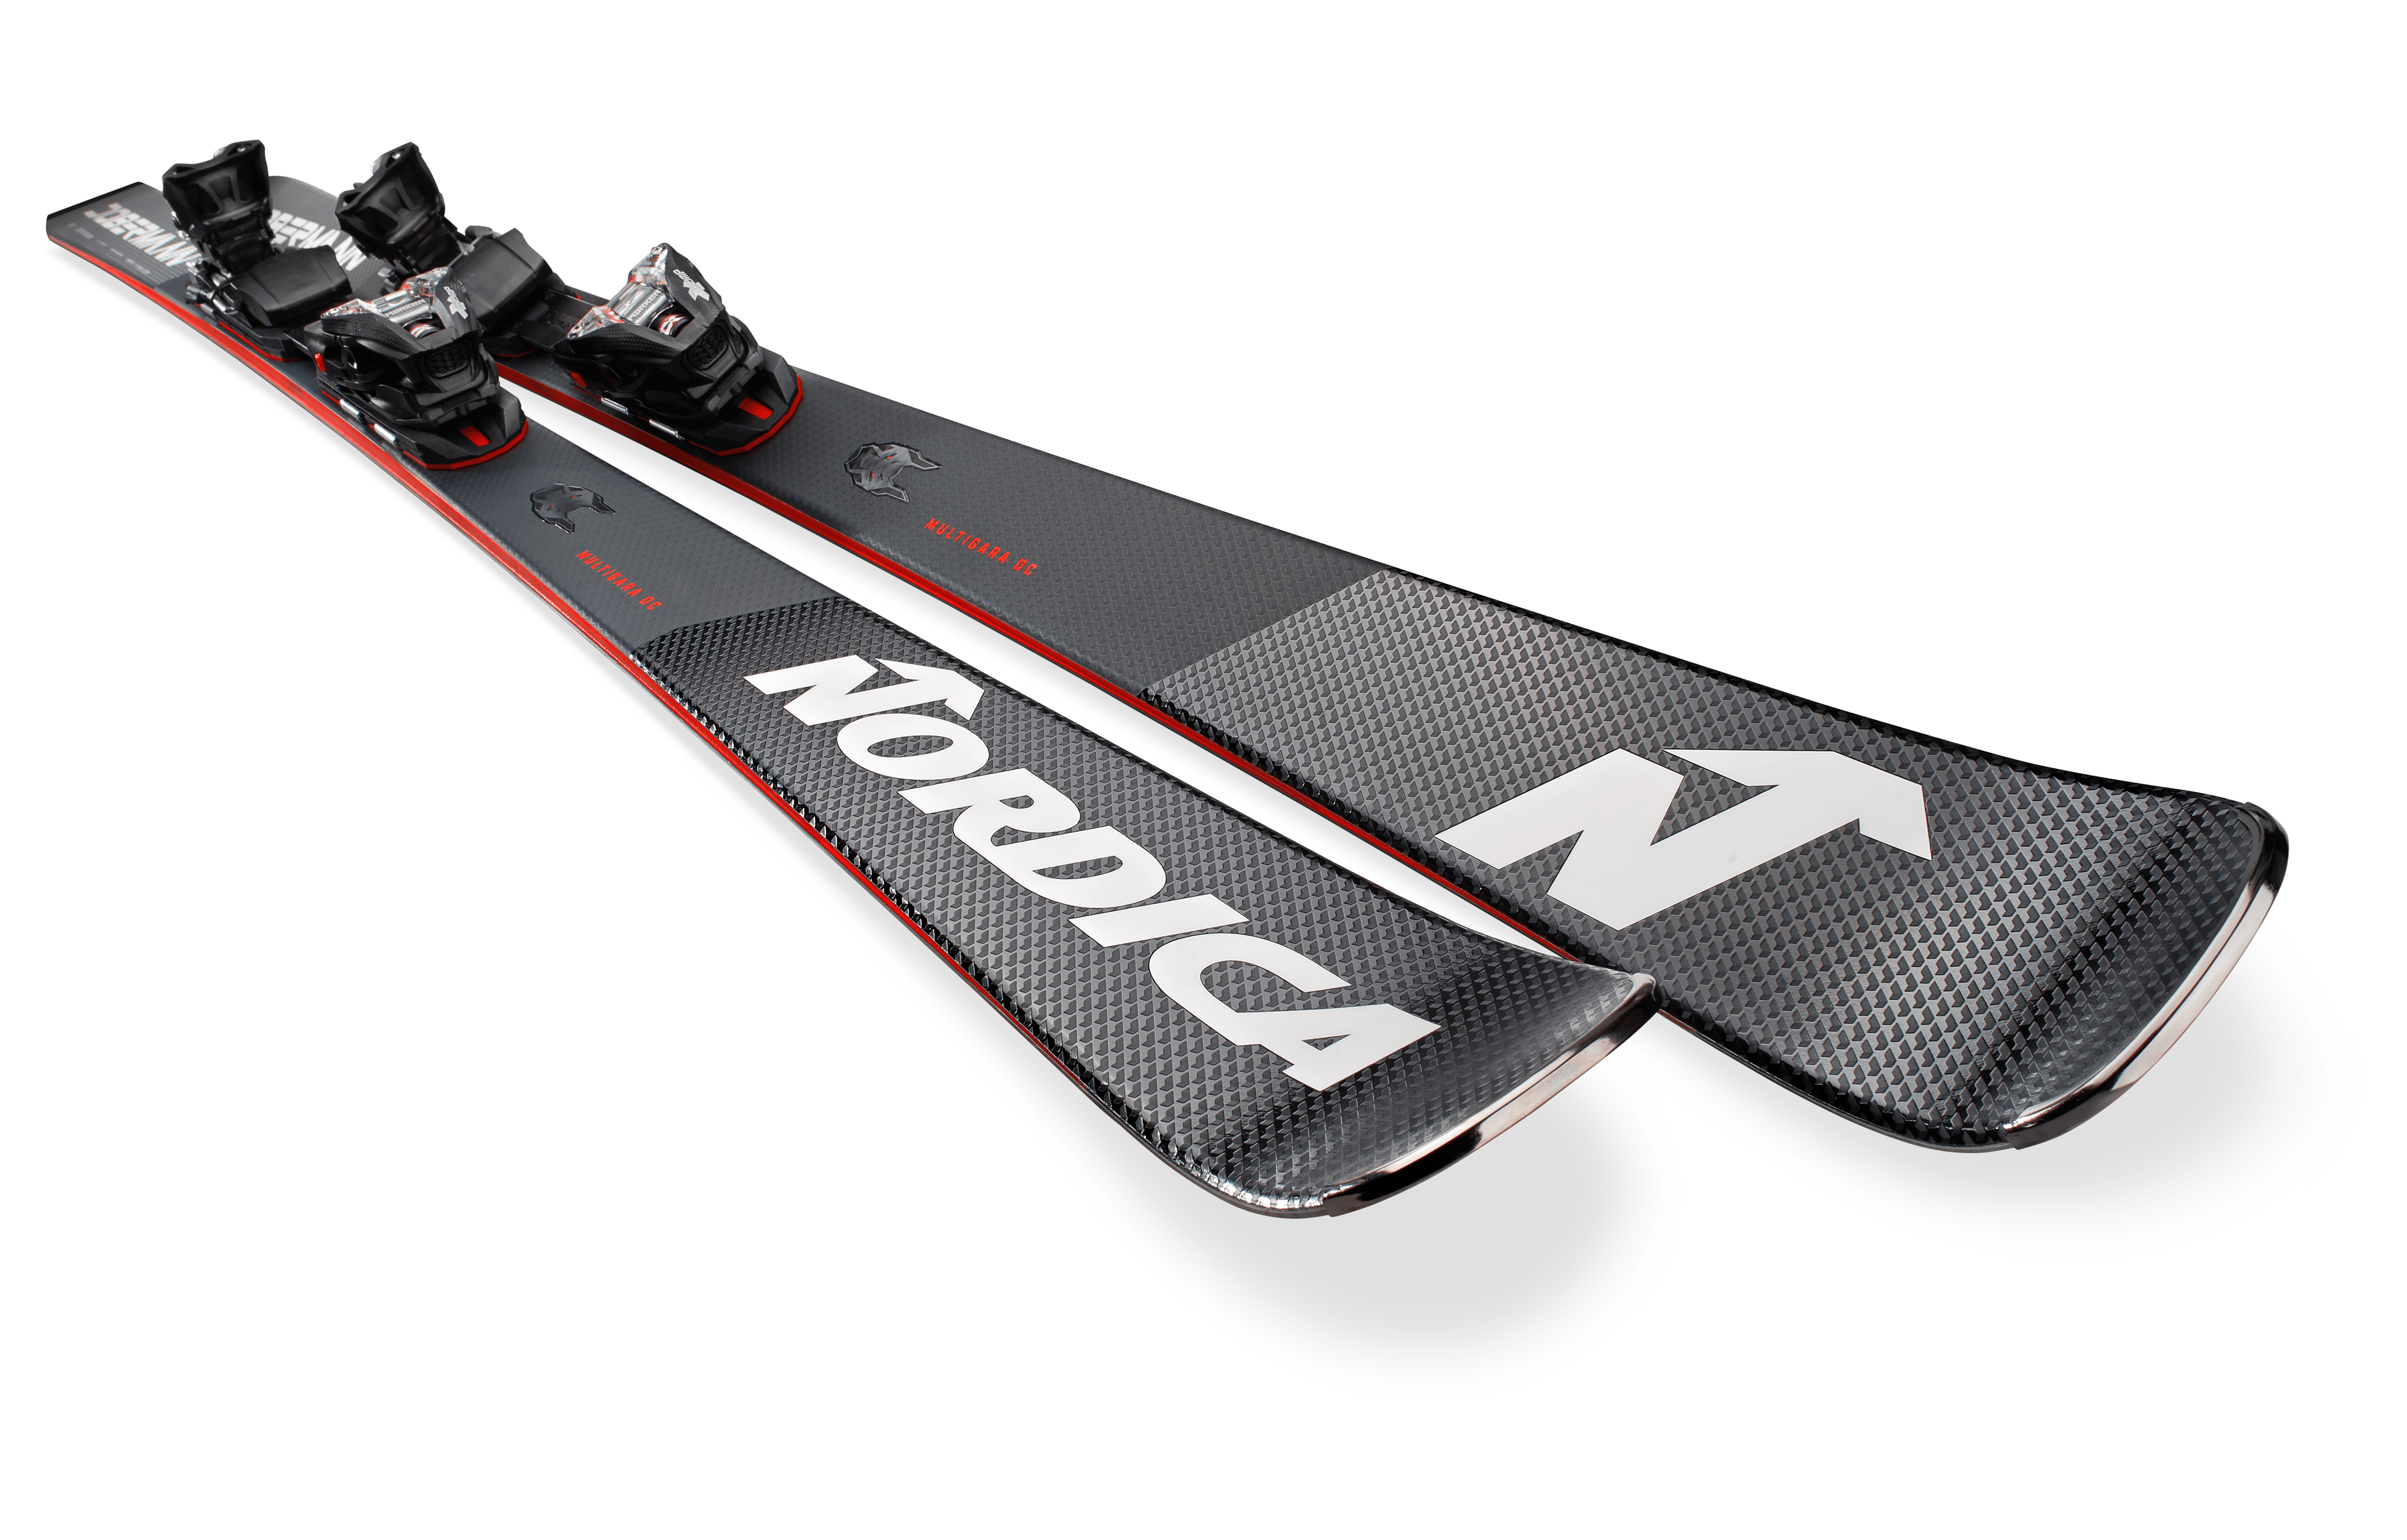 Picture of the Nordica Dobermann multigara dc race skis.